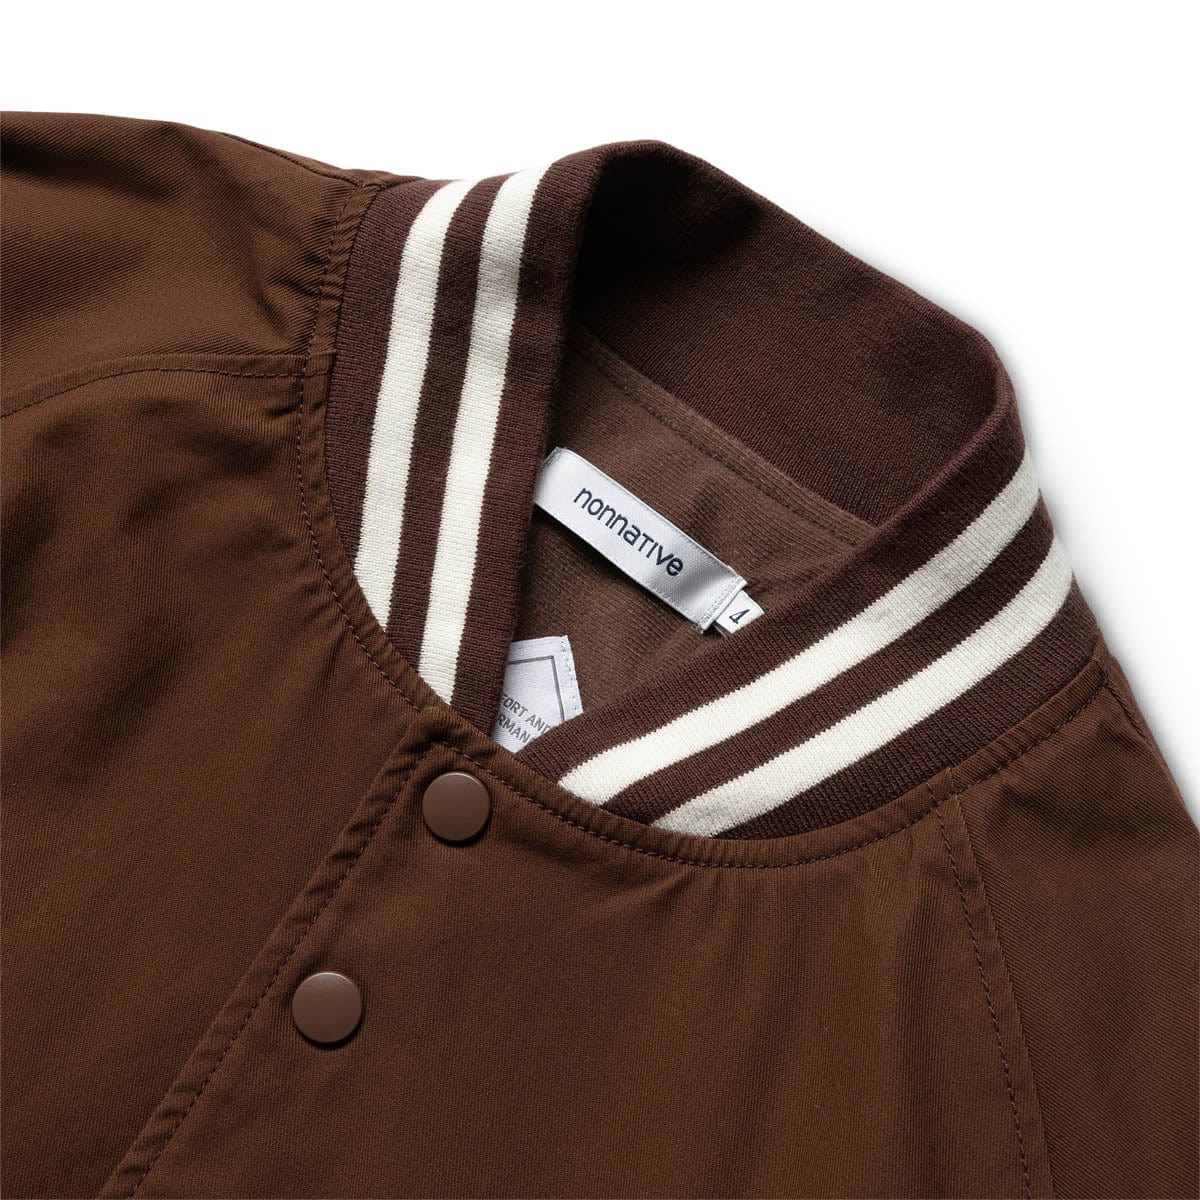 Nonnative Outerwear BROWN / 3 STUDENT JACKET WITH GORE-TEX INFINIUM